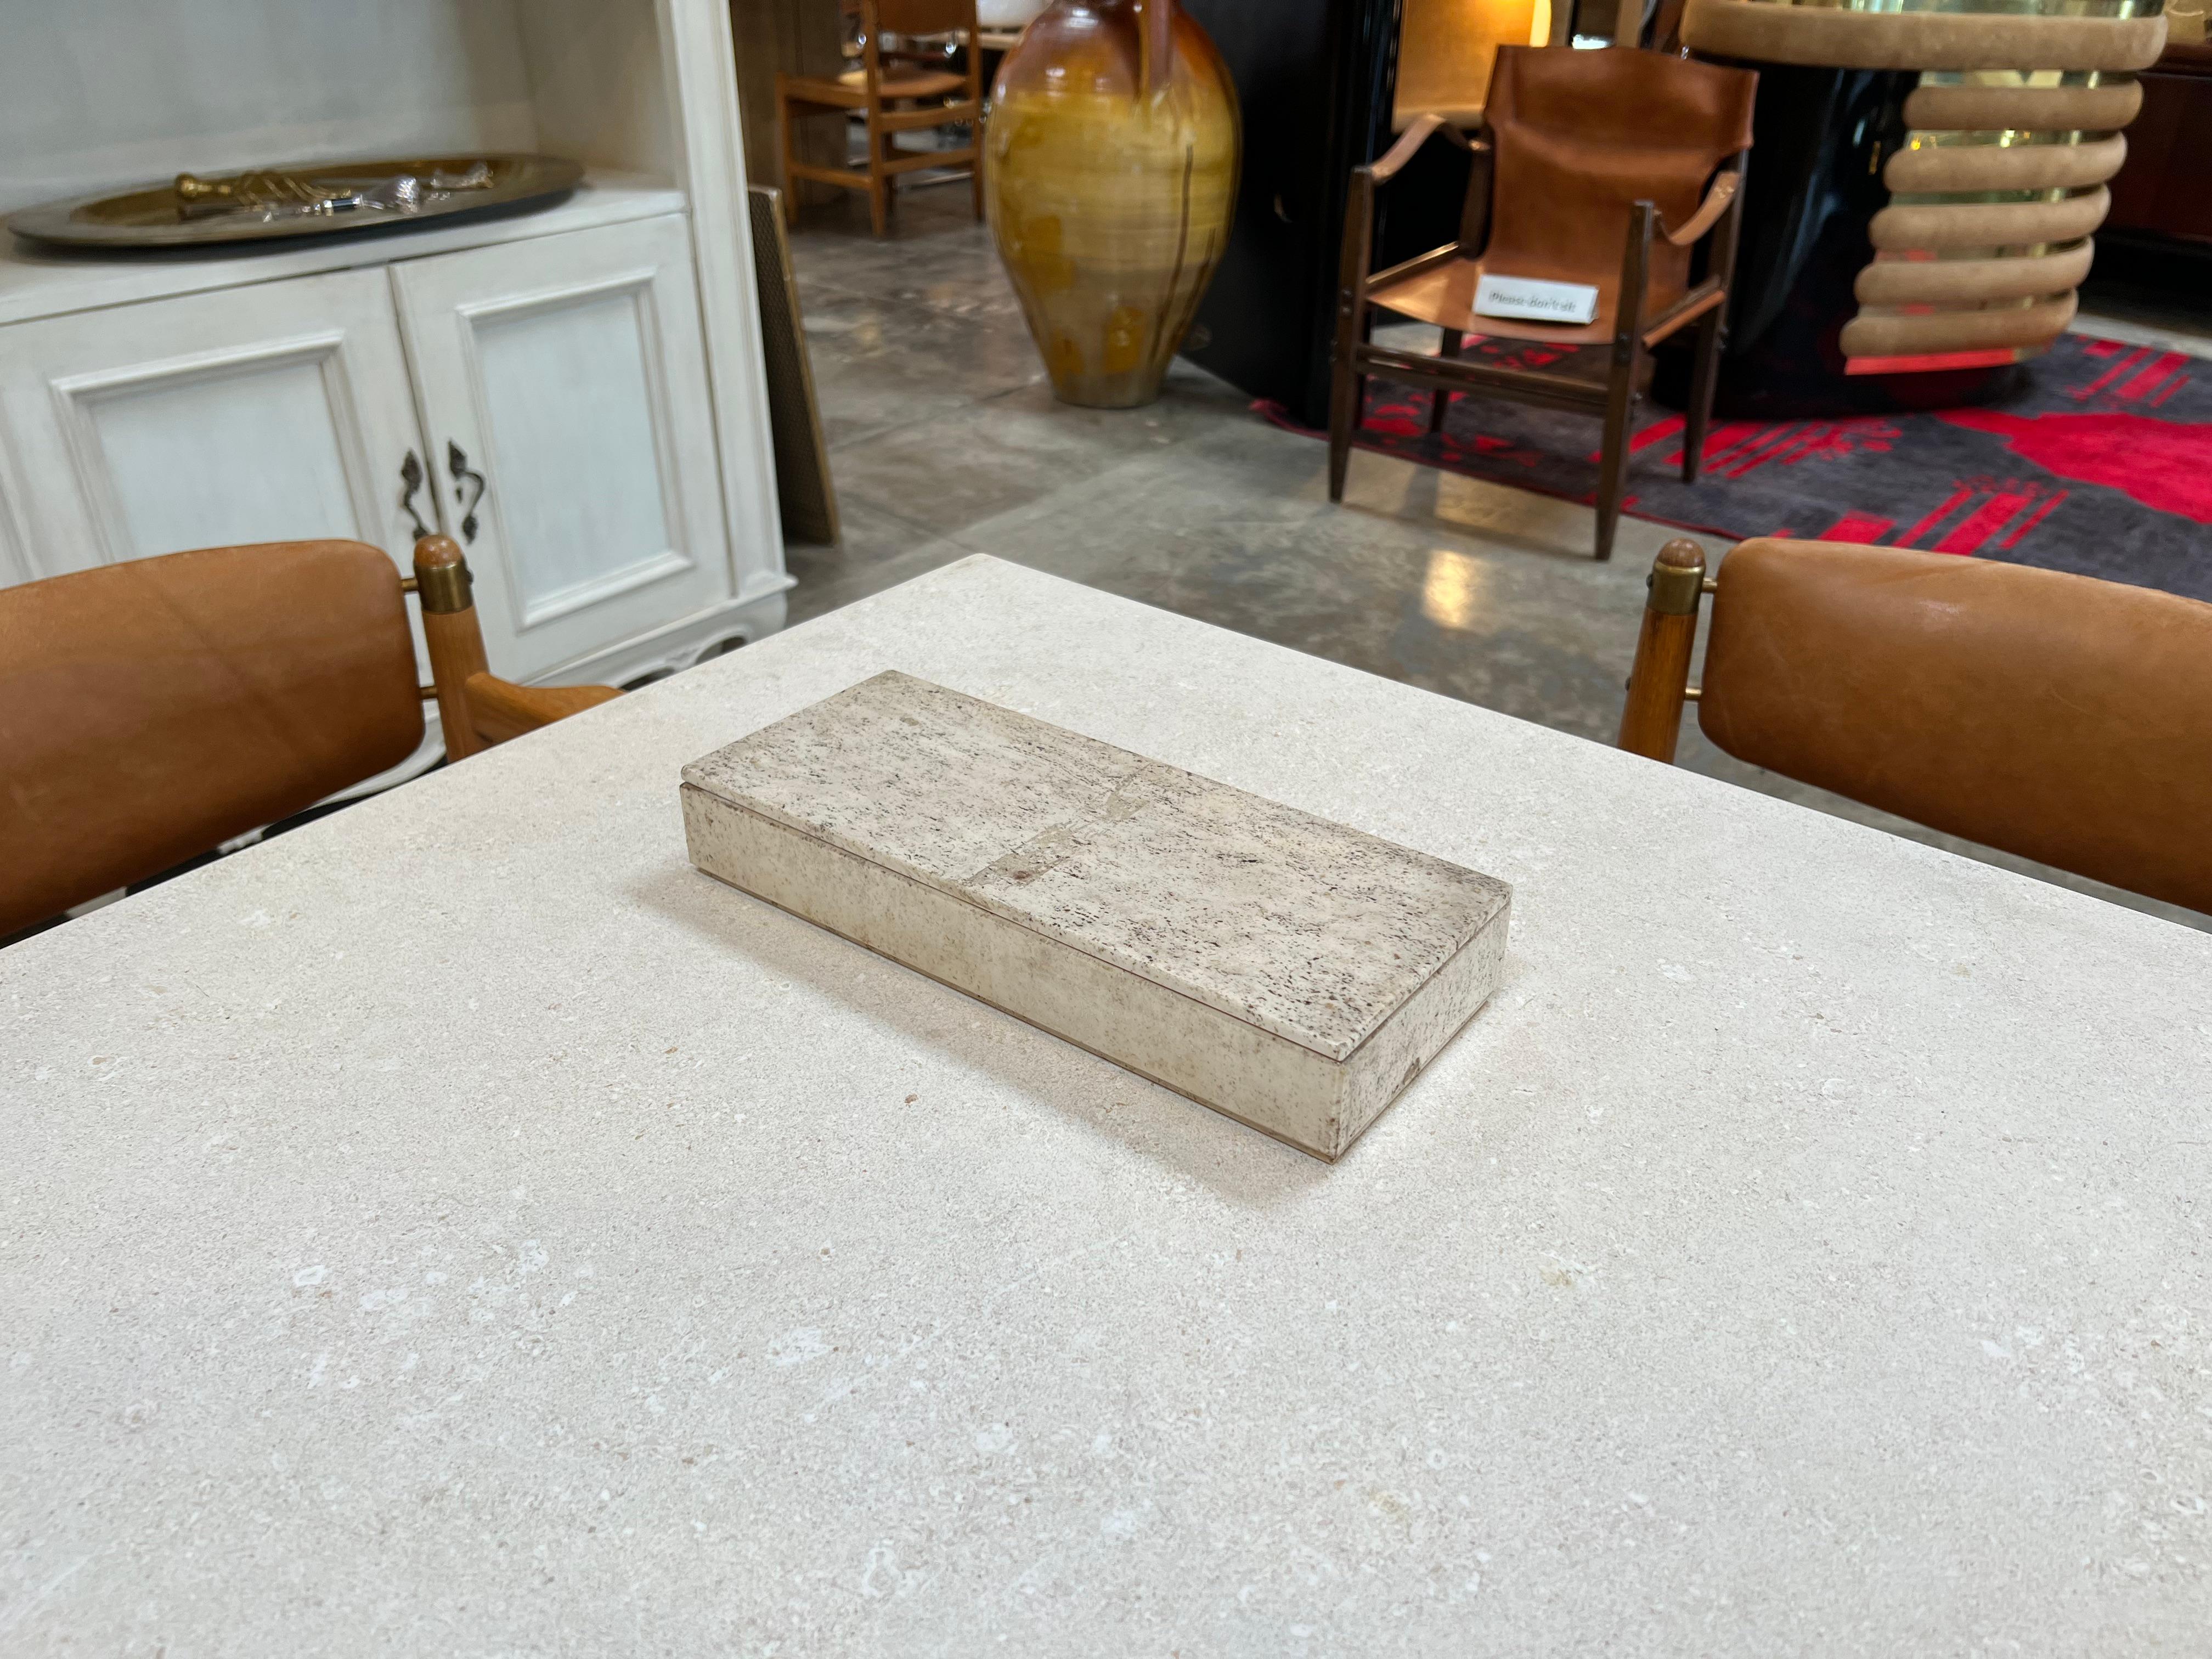 The Vintage Decorative Travertine Box from the 1980s is a meticulously crafted box entirely fashioned from travertine stone. Dating back to the 1980s, this unique piece showcases the beauty of natural stone, featuring intricate patterns and